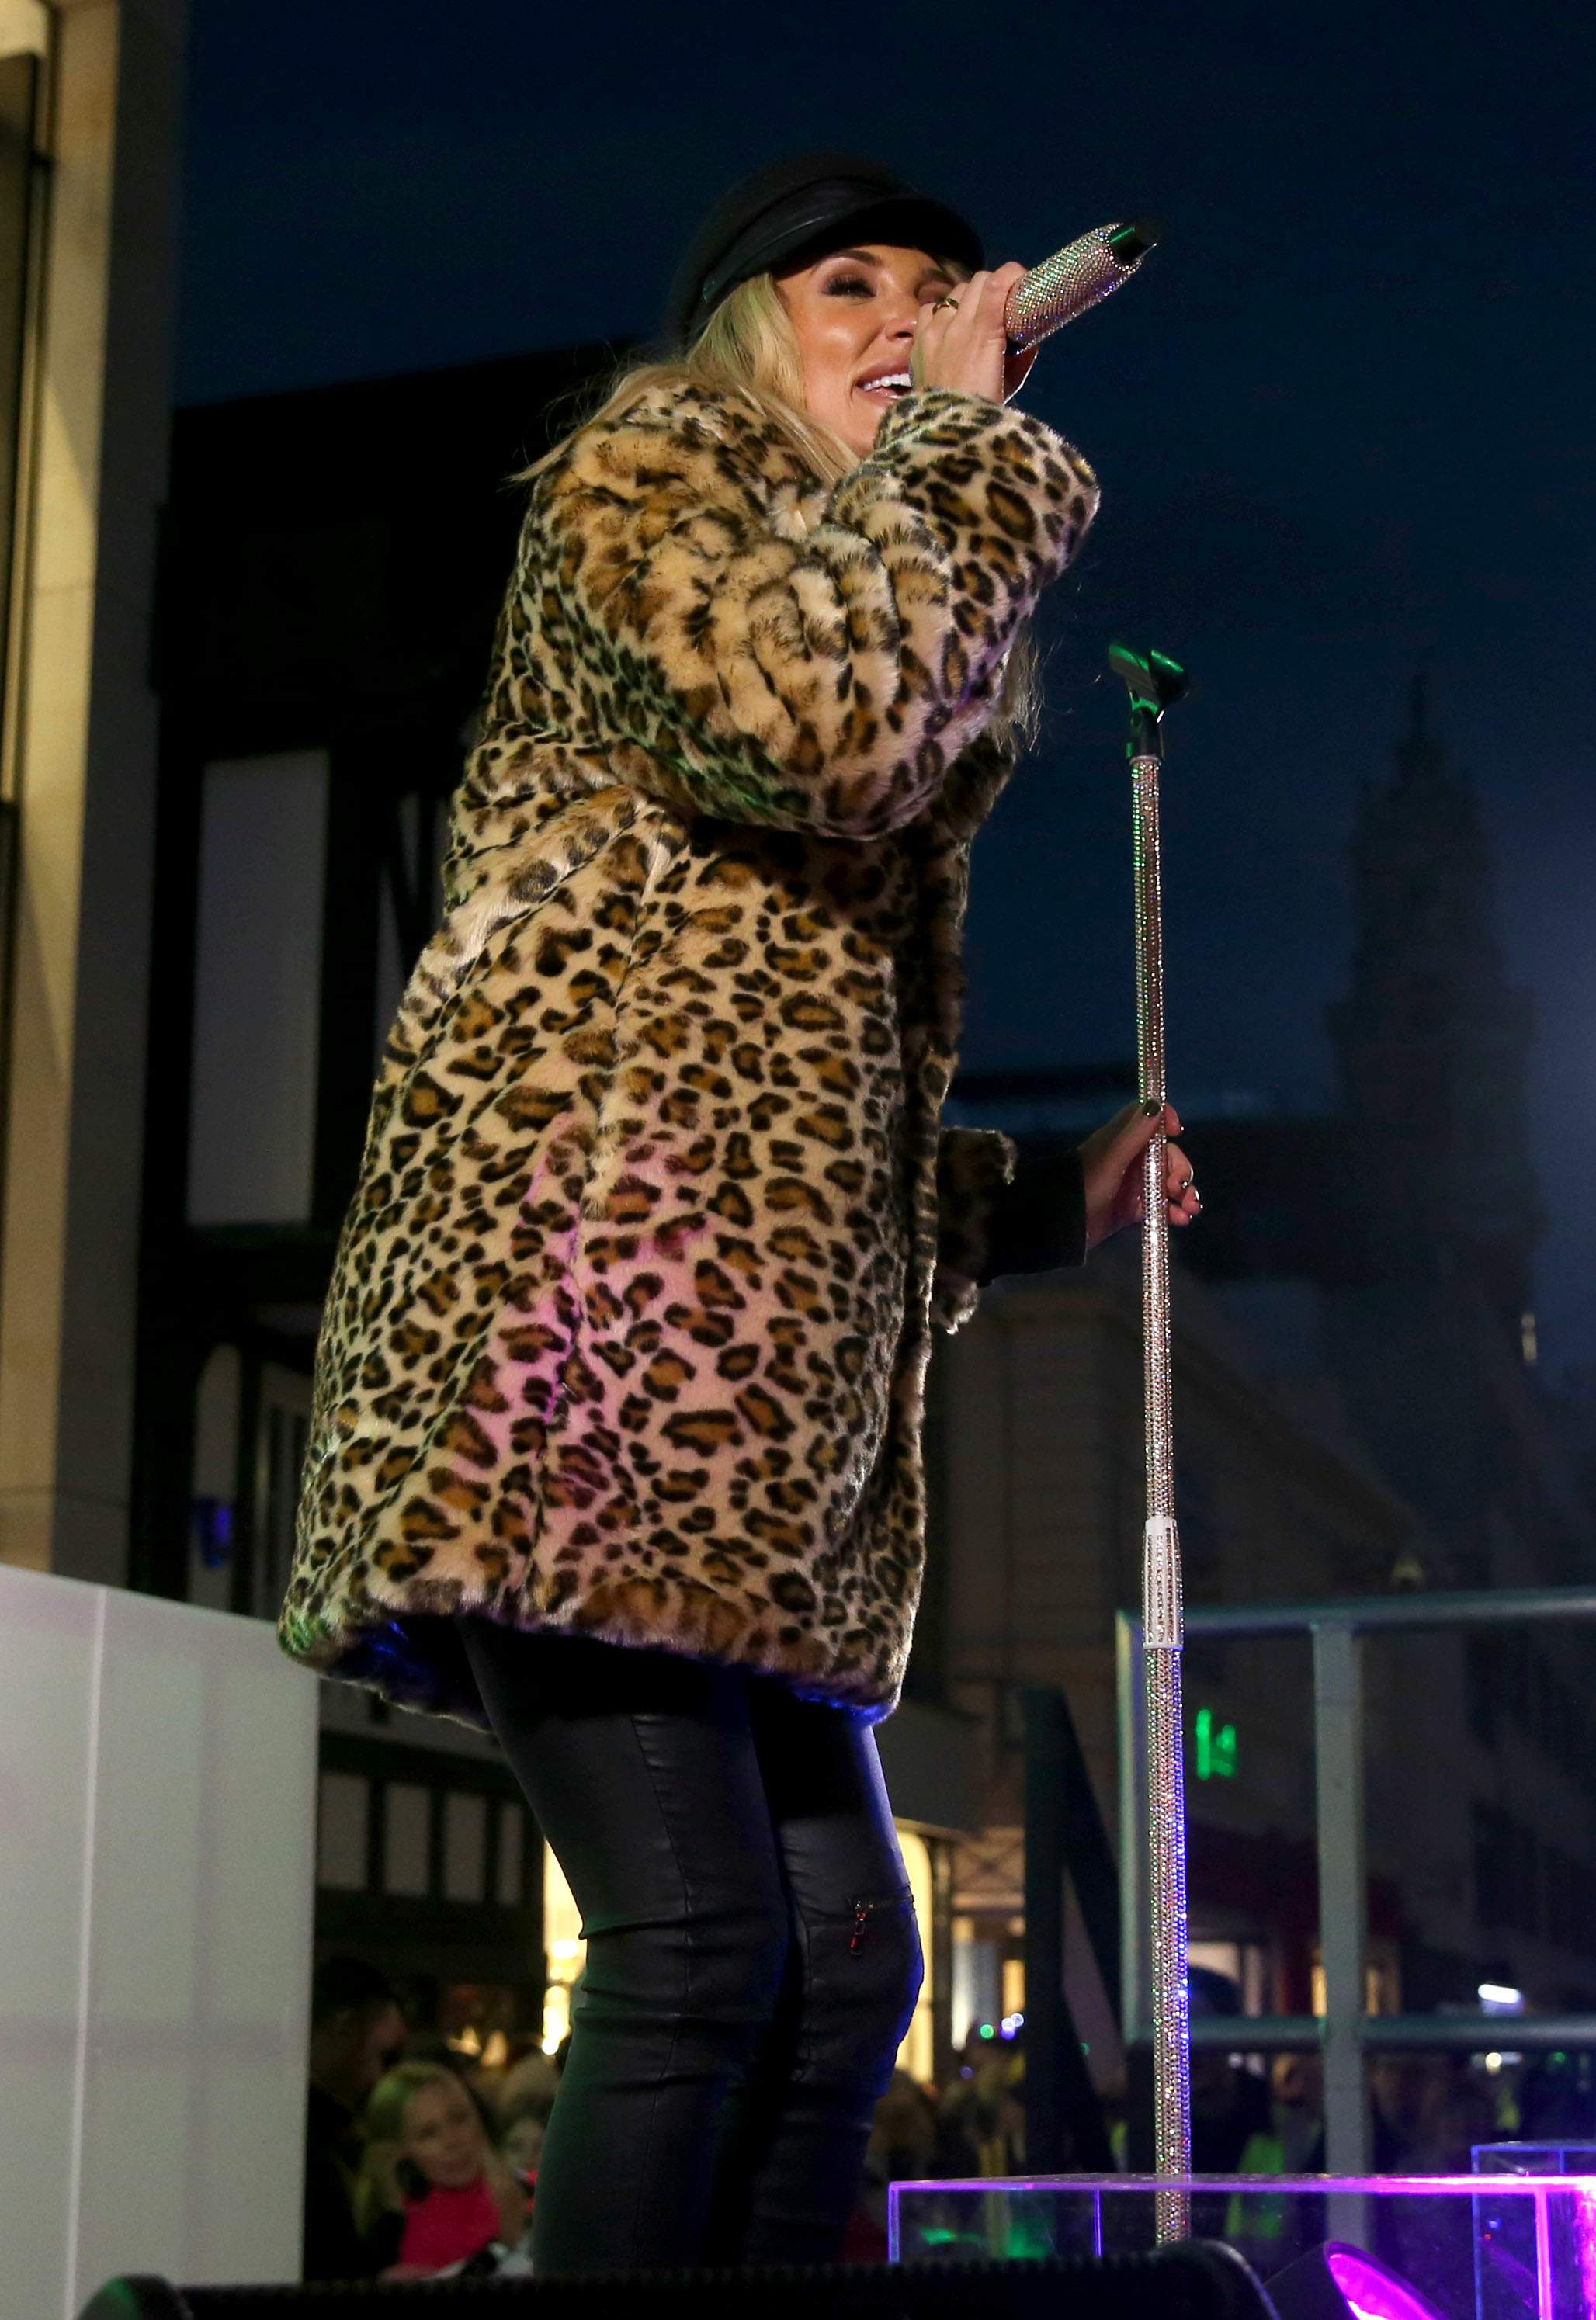 Megan McKenna performs at the Colchester Christmas lights switch